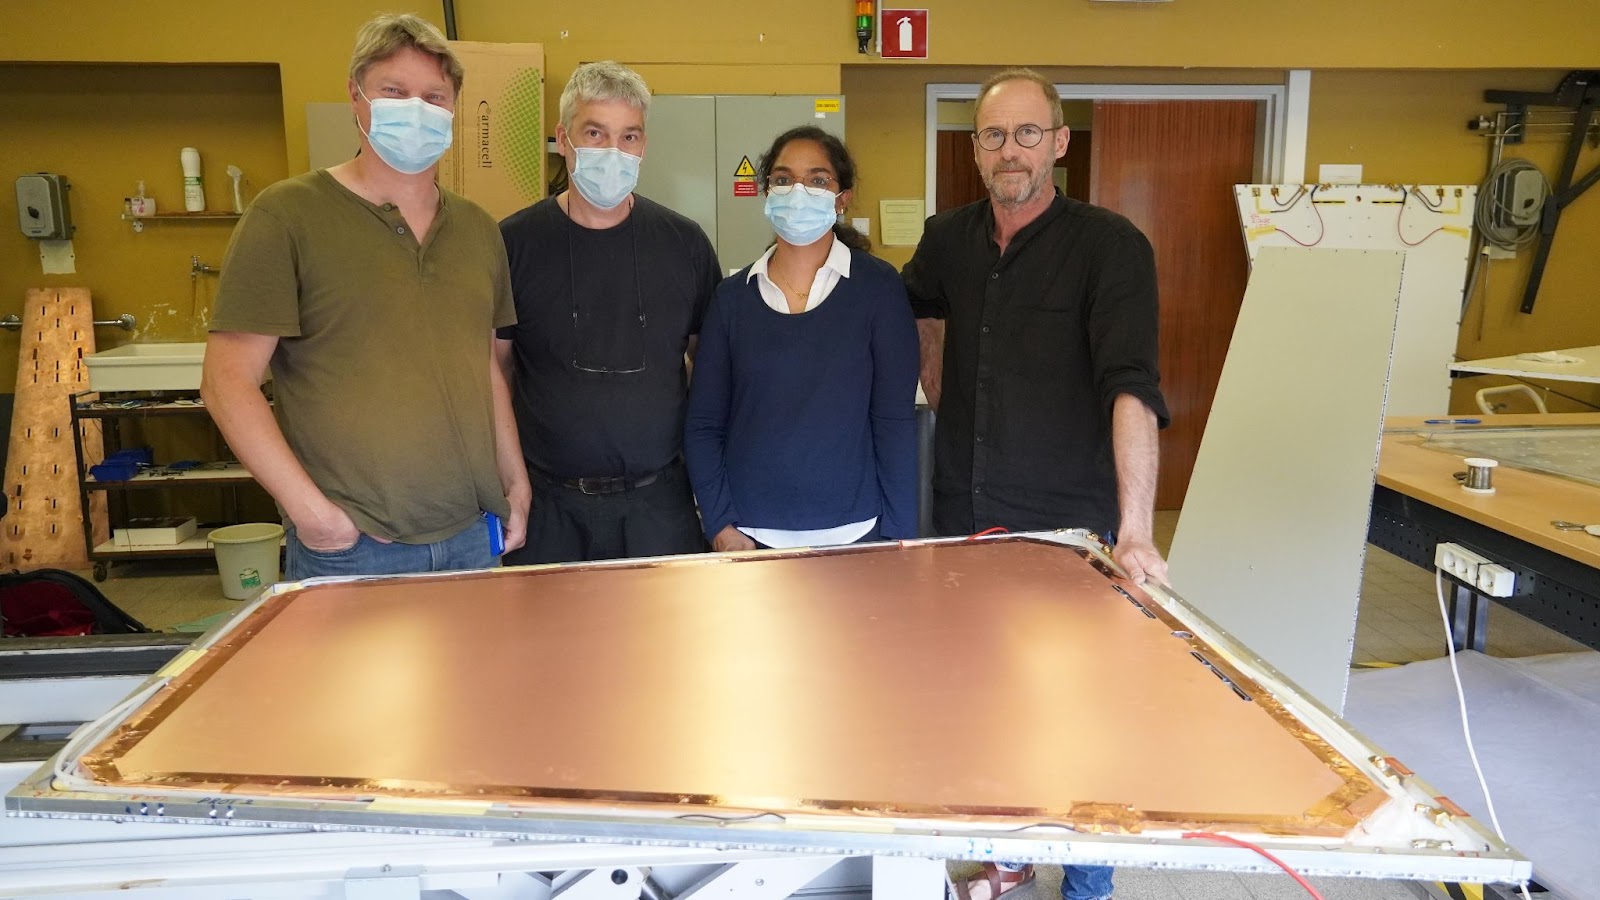 The UGent RPC team with the iRPC demonstrator chamber, with from left to right Dr. Michael Tytgat (site manager), Yves Israel (technician), Amrutha Samalan (PhD student, me :-), and Patrick Sennesael (technician).